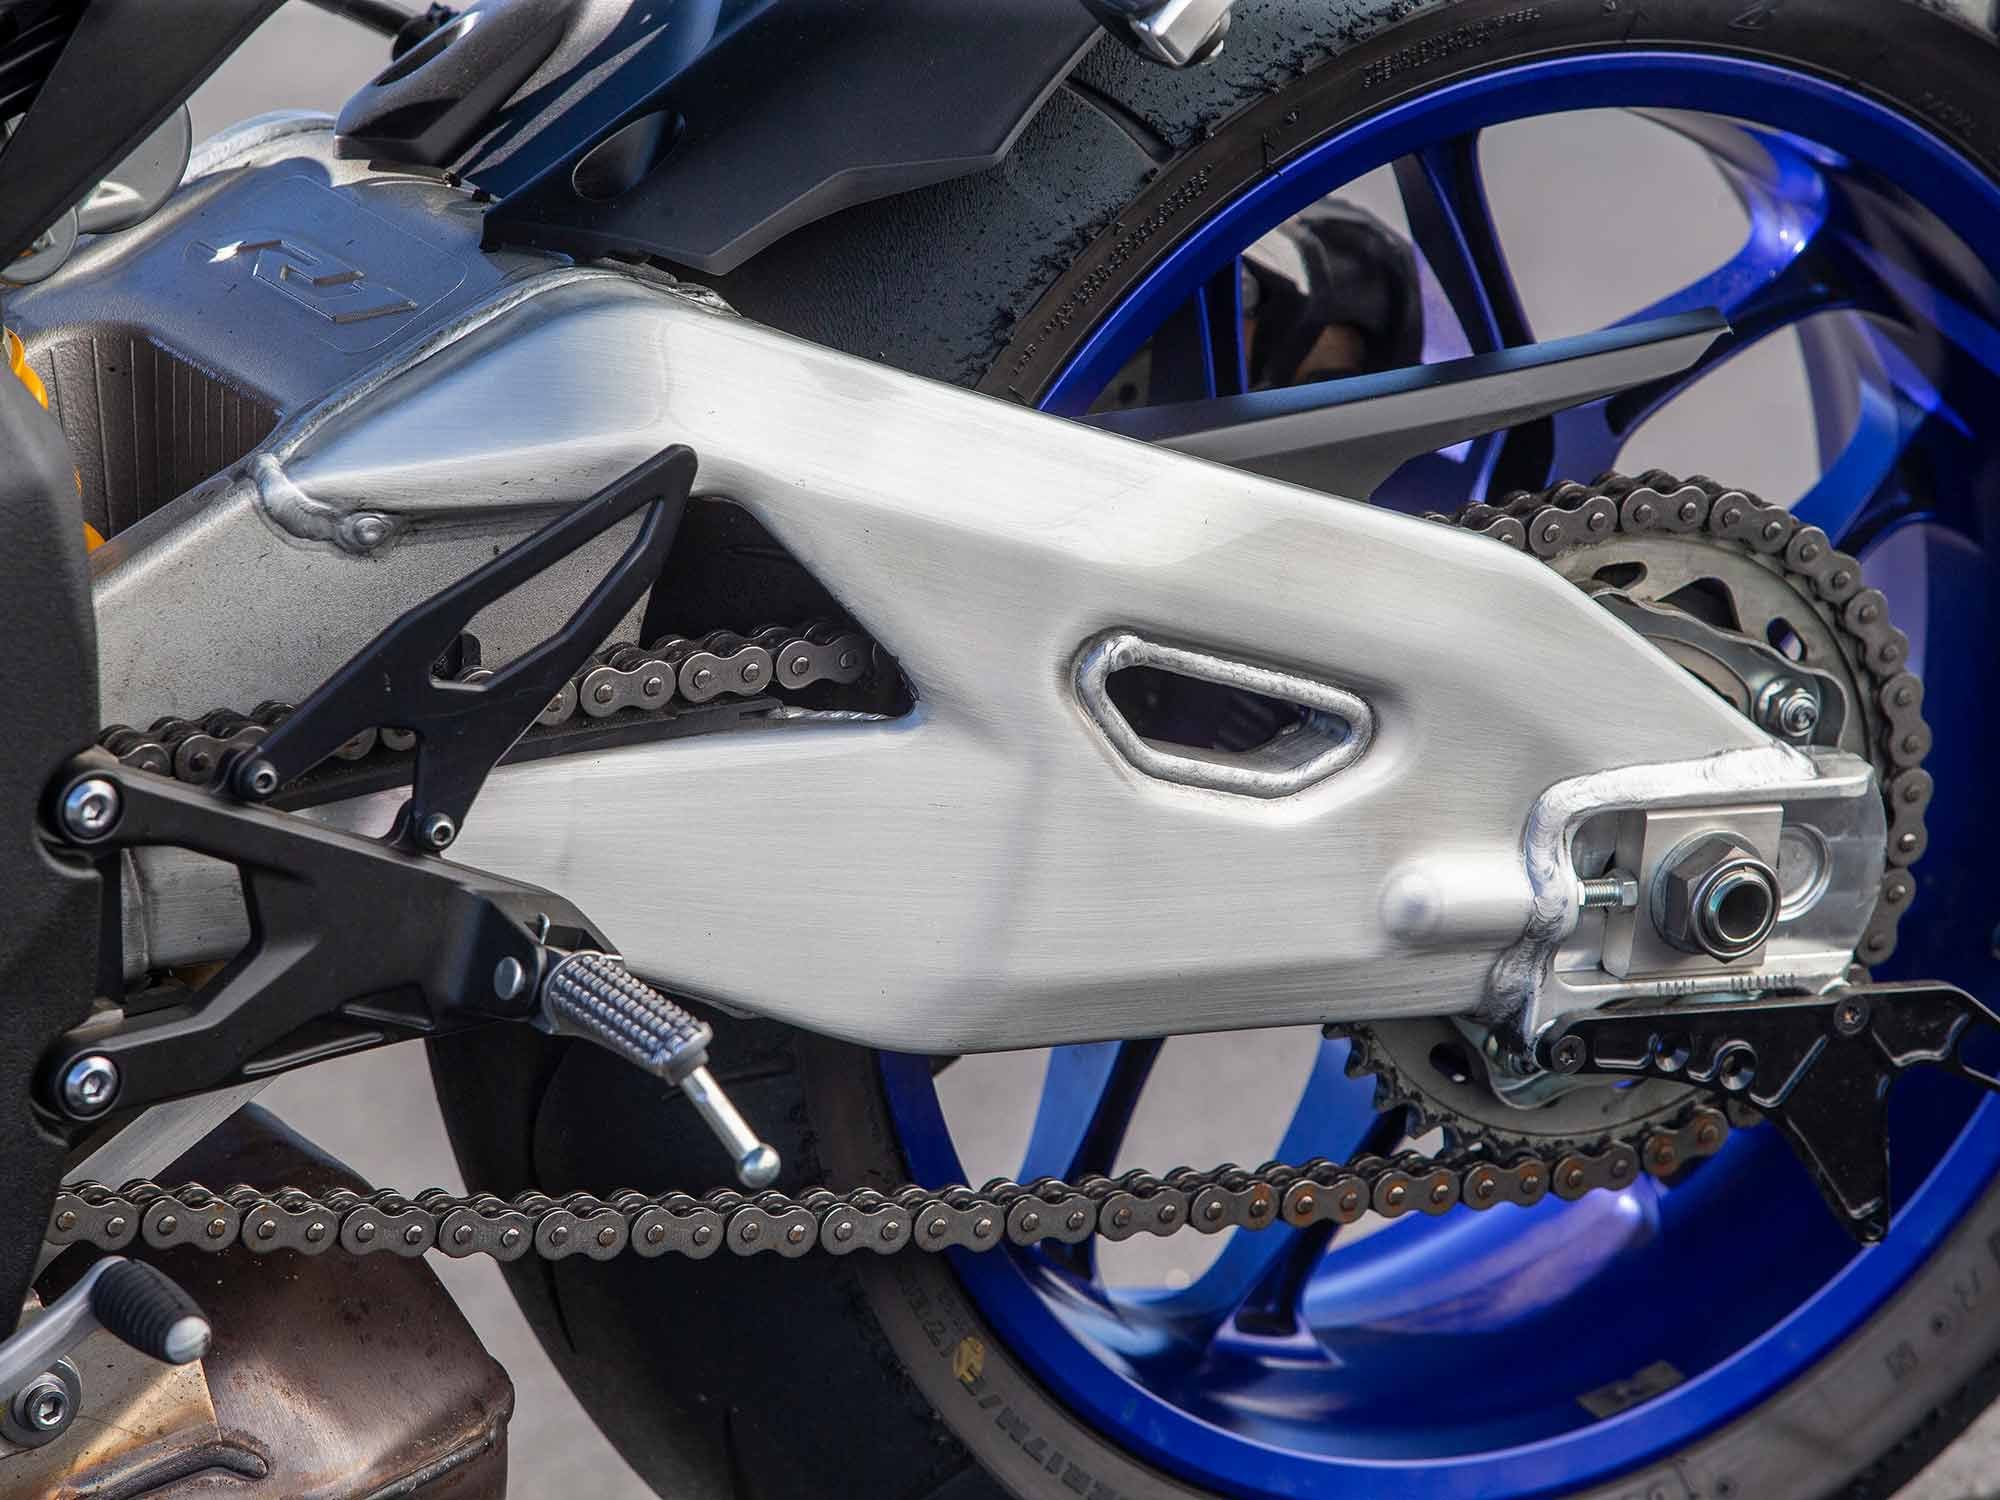 The YZF-R1M stands out with its polished aluminum swingarm versus the standard model’s painted piece.